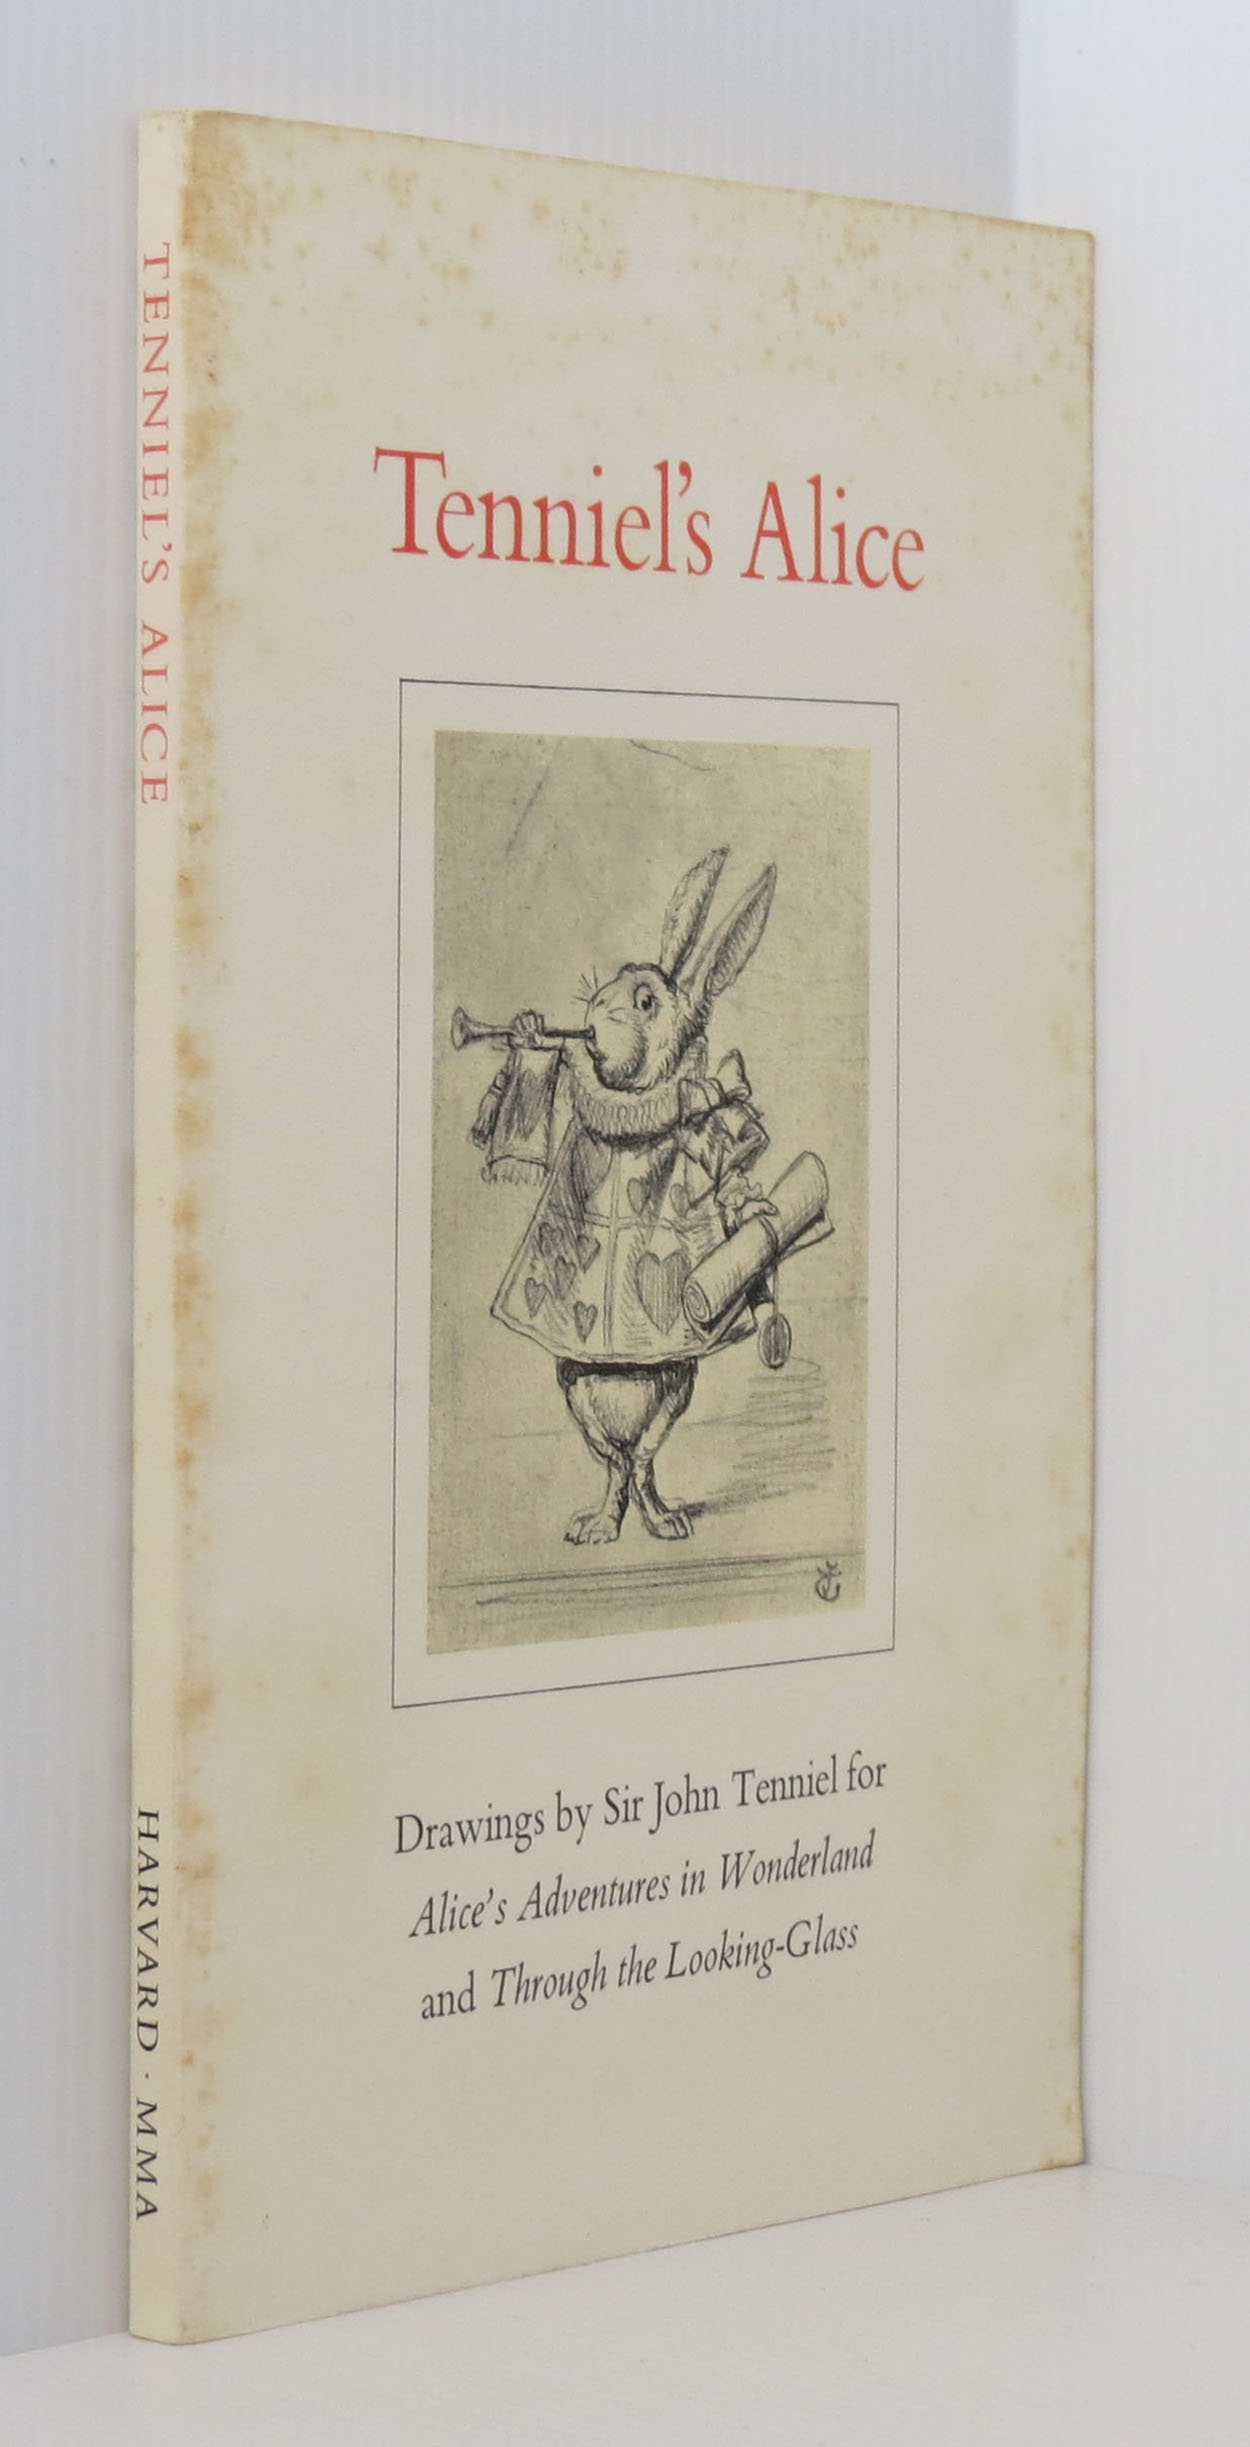 Image for Tenniel's Alice: Drawings By Sir John Tenniel for Alices' Adventures in Wonderland and Through the Looking-Glass